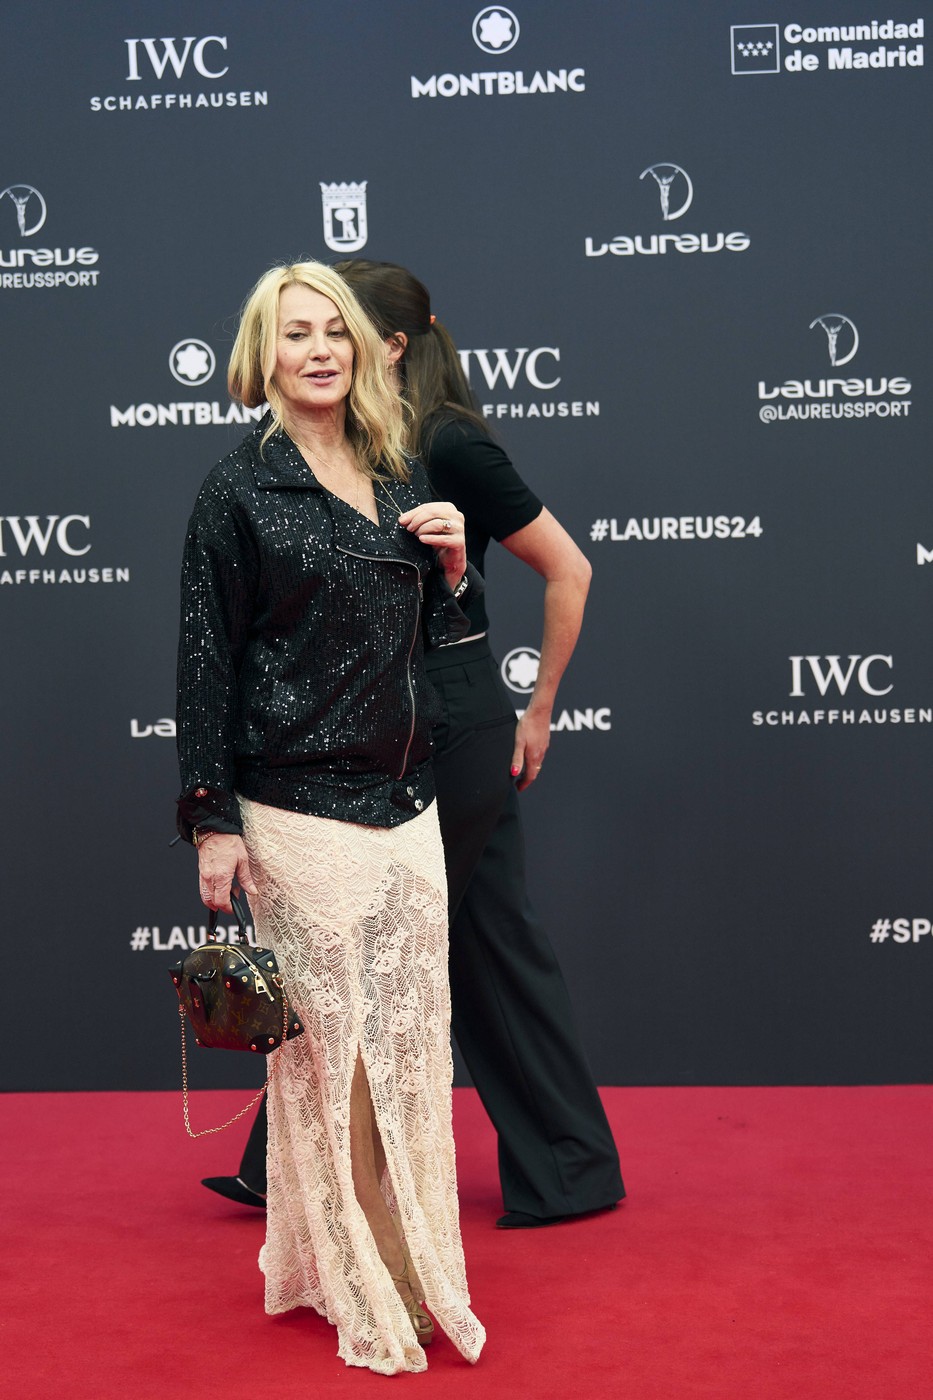 Laureus World Sports Awards Madrid 2024 - Red Carpet Nadia Comaneci attends Laureus World Sports Awards Madrid 2024 - Red Carpet at Palacio de Cibeles on April 22, 2024 in Madrid, Spain Photo by IMAGO/MPG Madrid Palacio de Cibeles Madrid Spain Copyright: xMPGx,Image: 867113935, License: Rights-managed, Restrictions: PUBLICATIONxNOTxINxESPxNED, Credit images as 